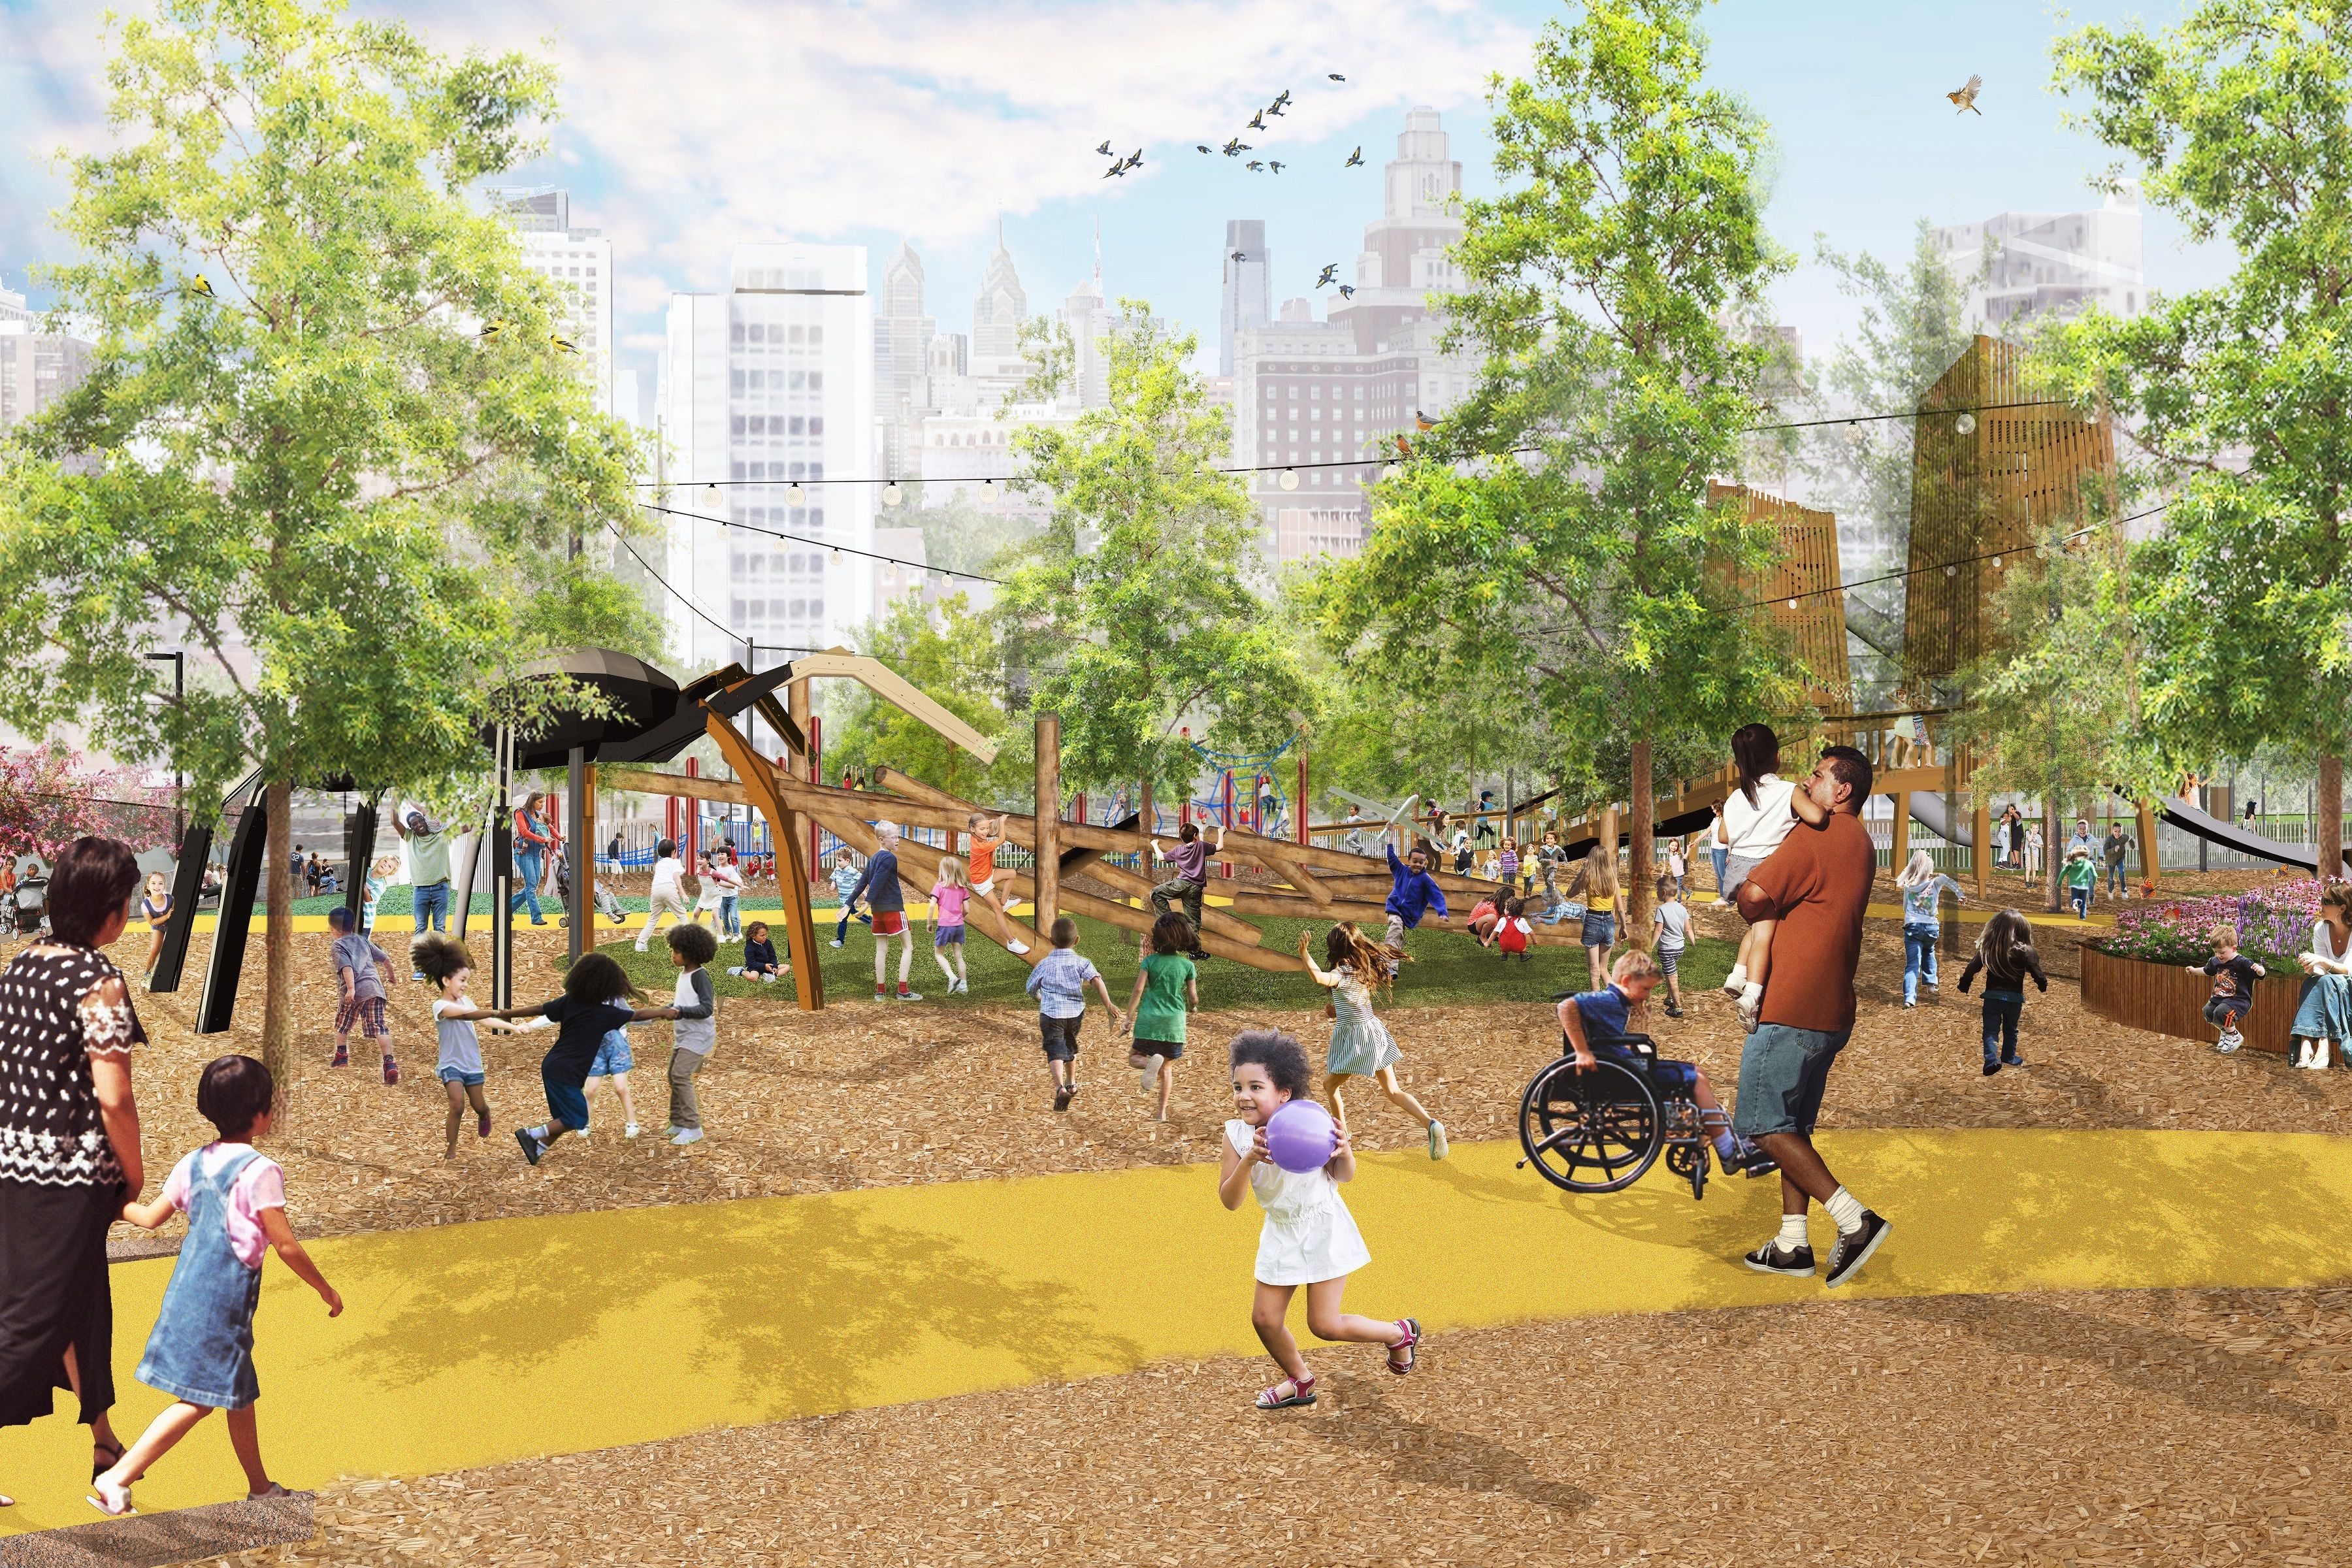 A rendering of a play area at the new park.  